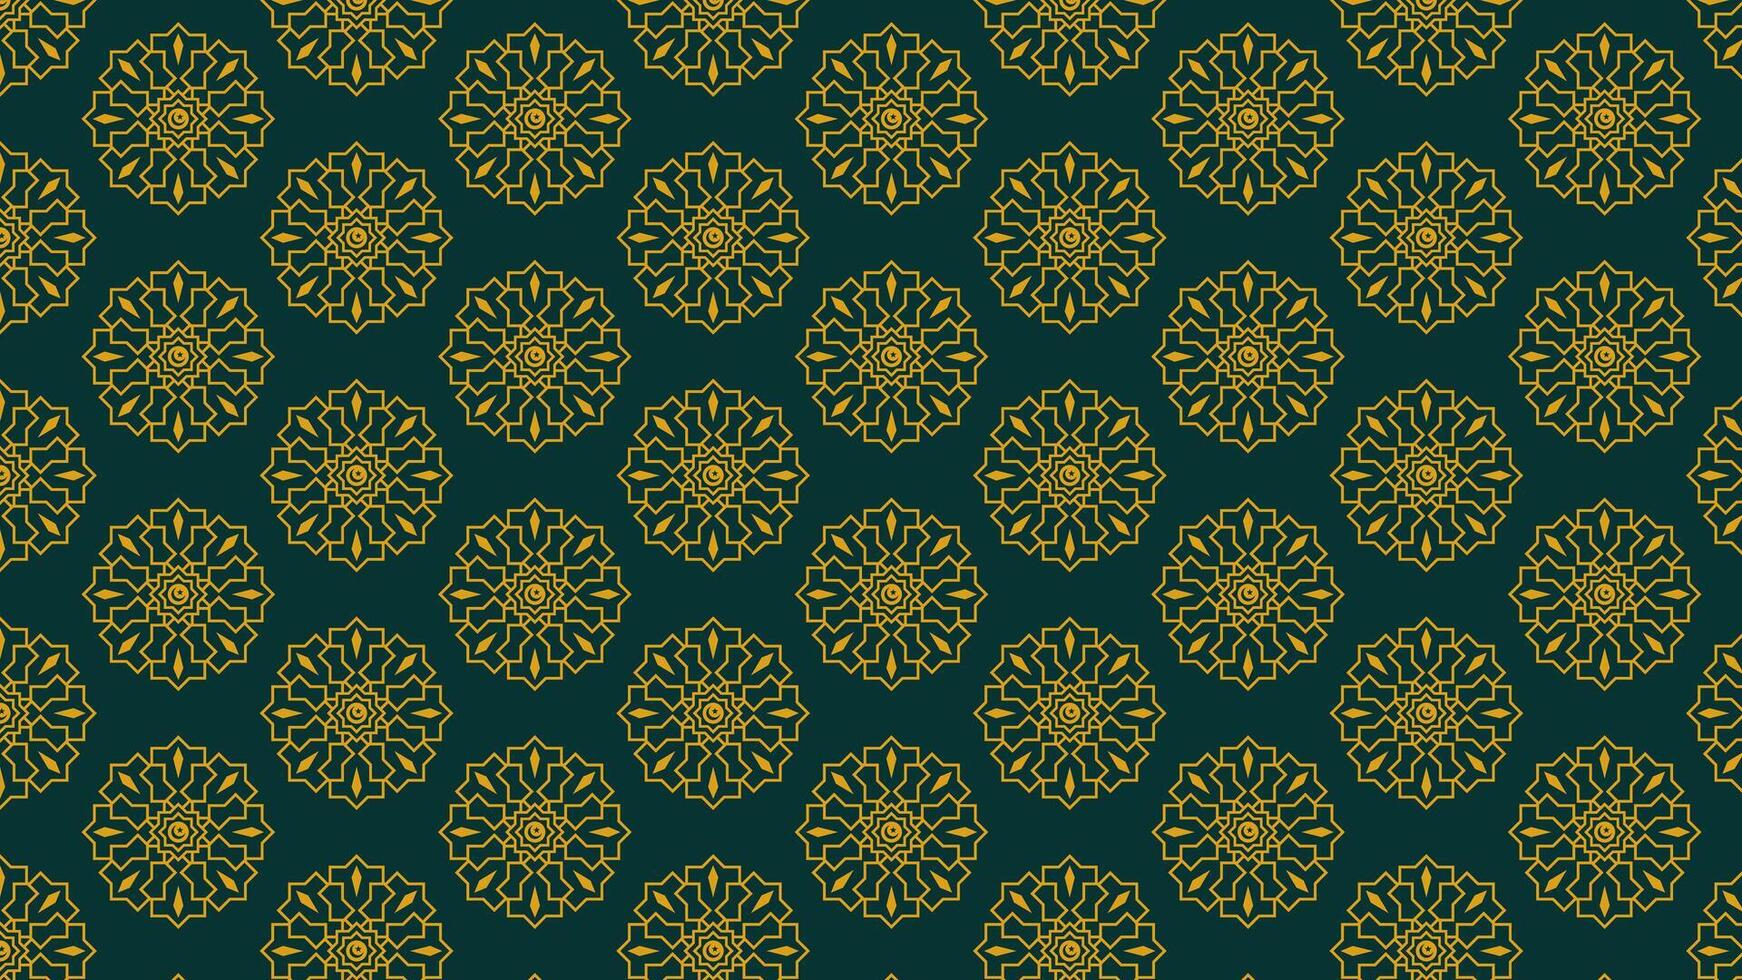 Golden floral islamic pattern on a dark green background vector